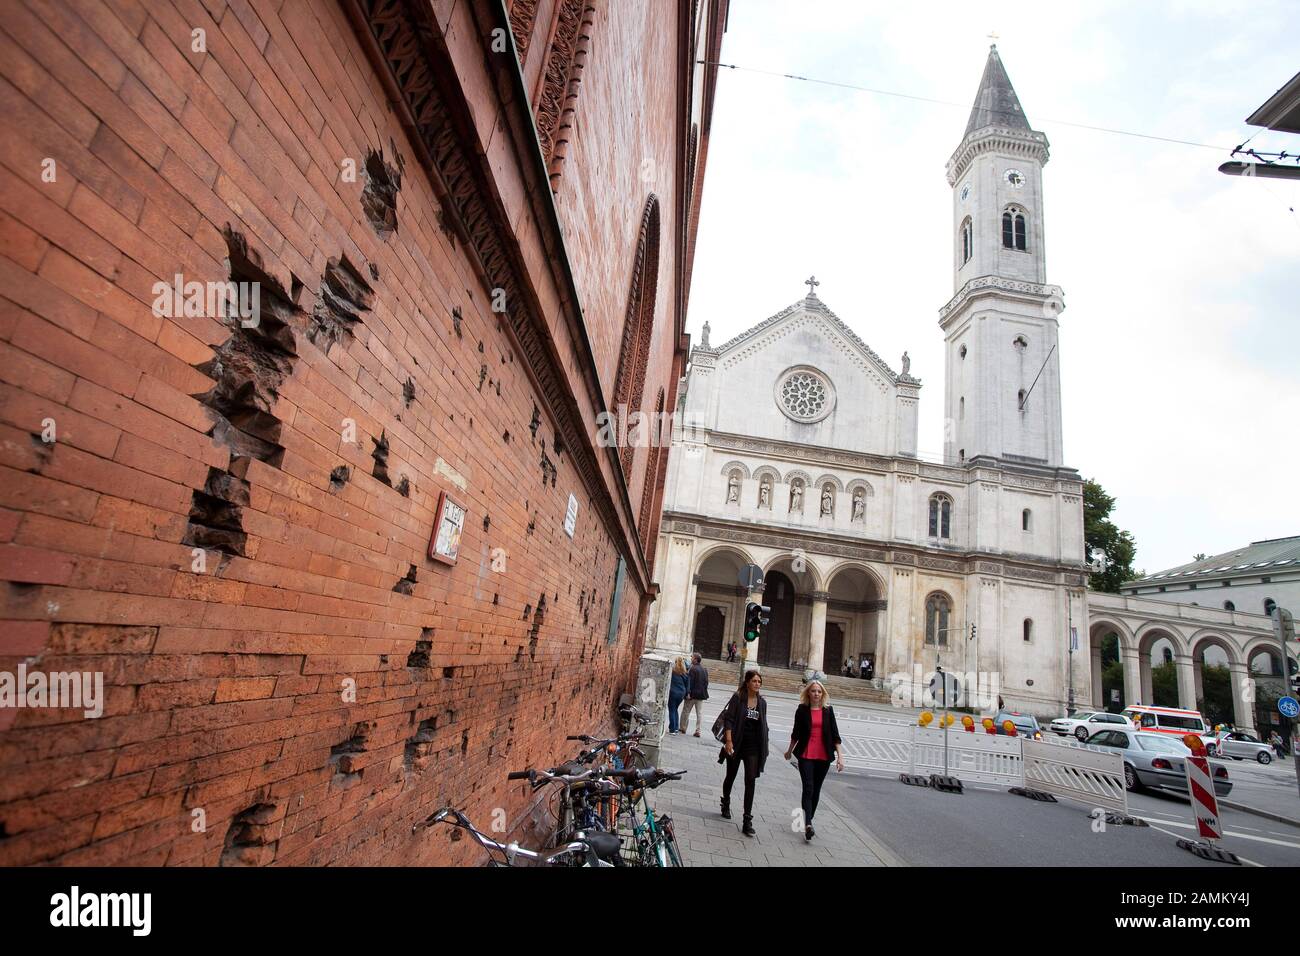 On the wall of the brick building of the Munich Ludwig-Maximilians-University (LMU) at the corner of Ludwigstraße / Schellingstraße are bullet holes from the Second World War. In the background the Ludwigskirche. [automated translation] Stock Photo